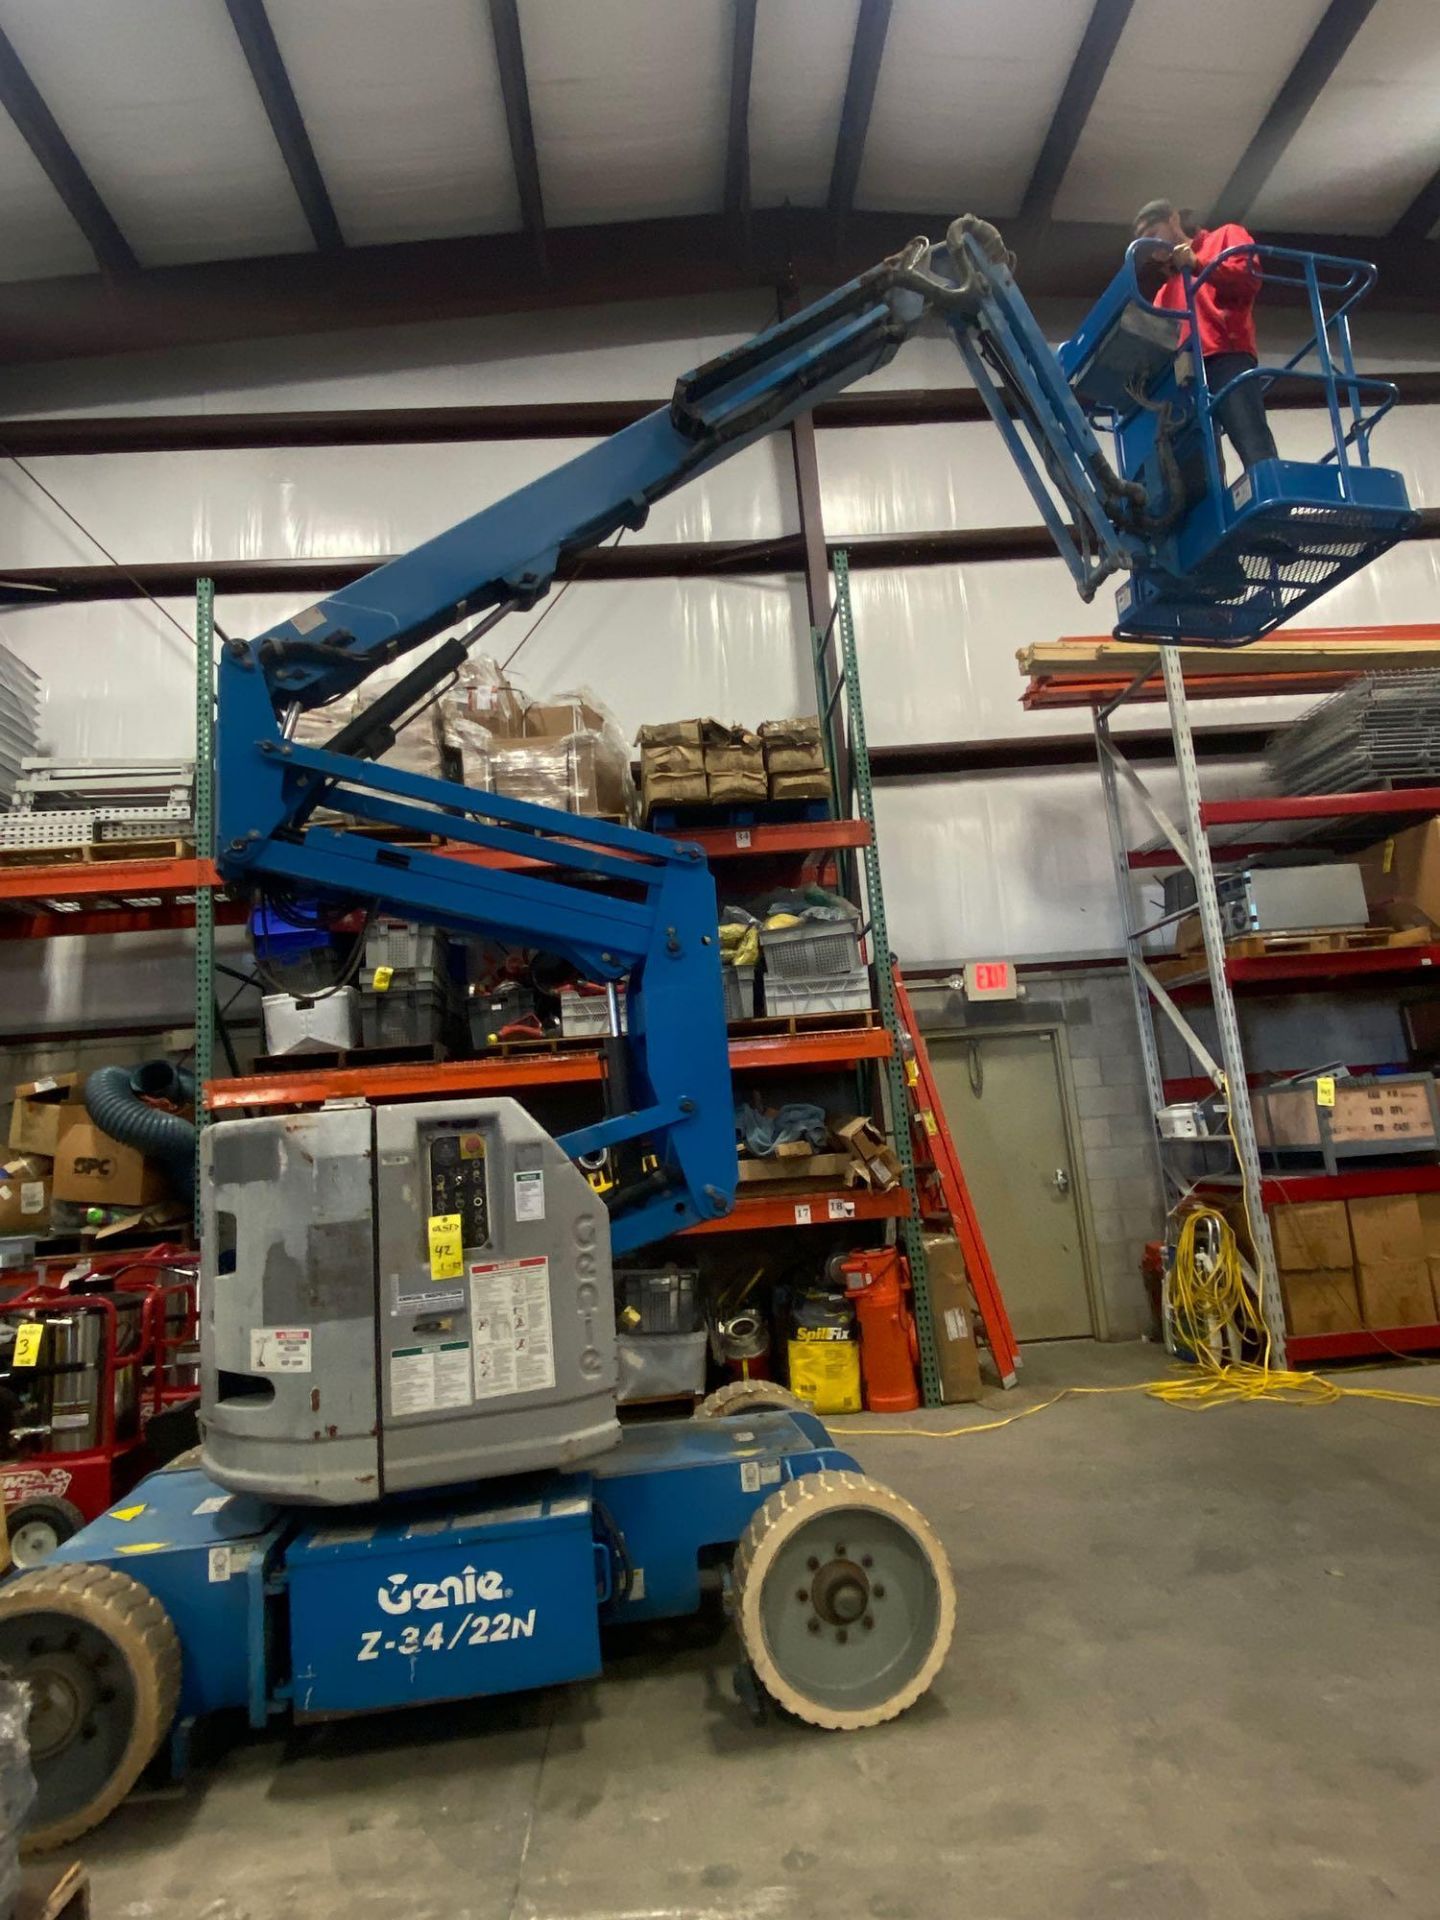 GENIE Z34-22 ARTICULATING ELECTRIC MAN LIFT, BUILT IN BATTERY CHARGER, NON MARKING TIRES - Image 2 of 5